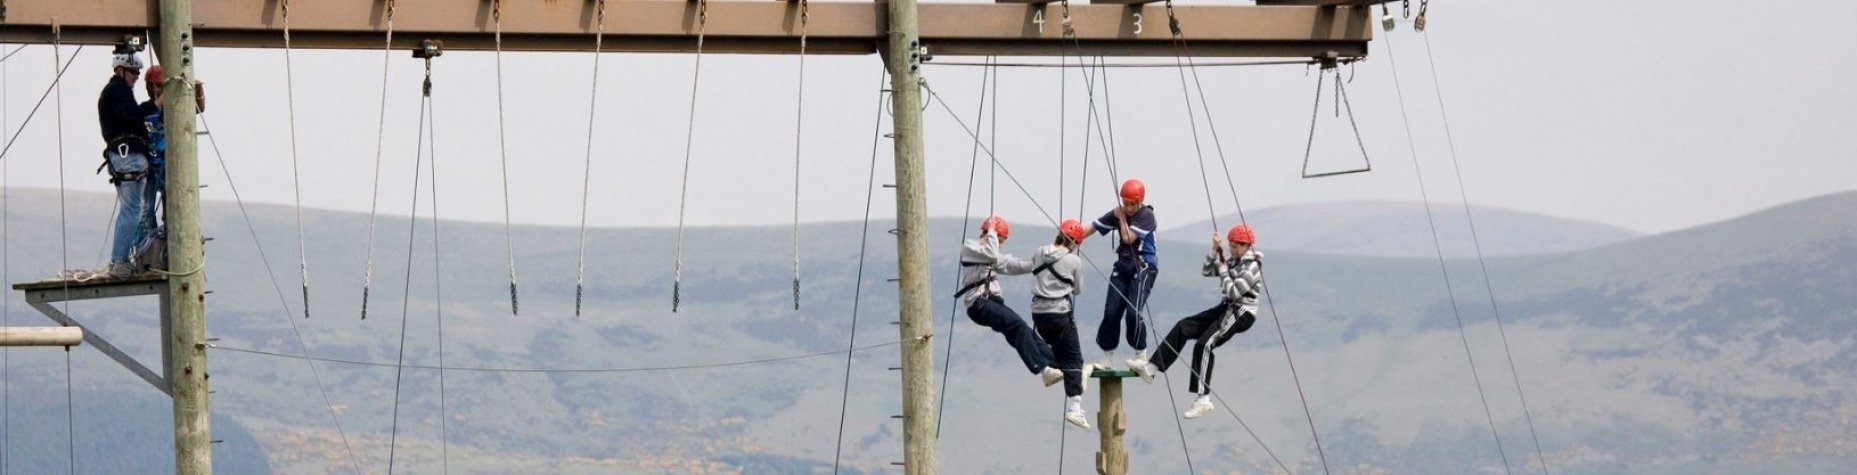 Group of students on a high ropes climbing session with the mountains in the backdrop